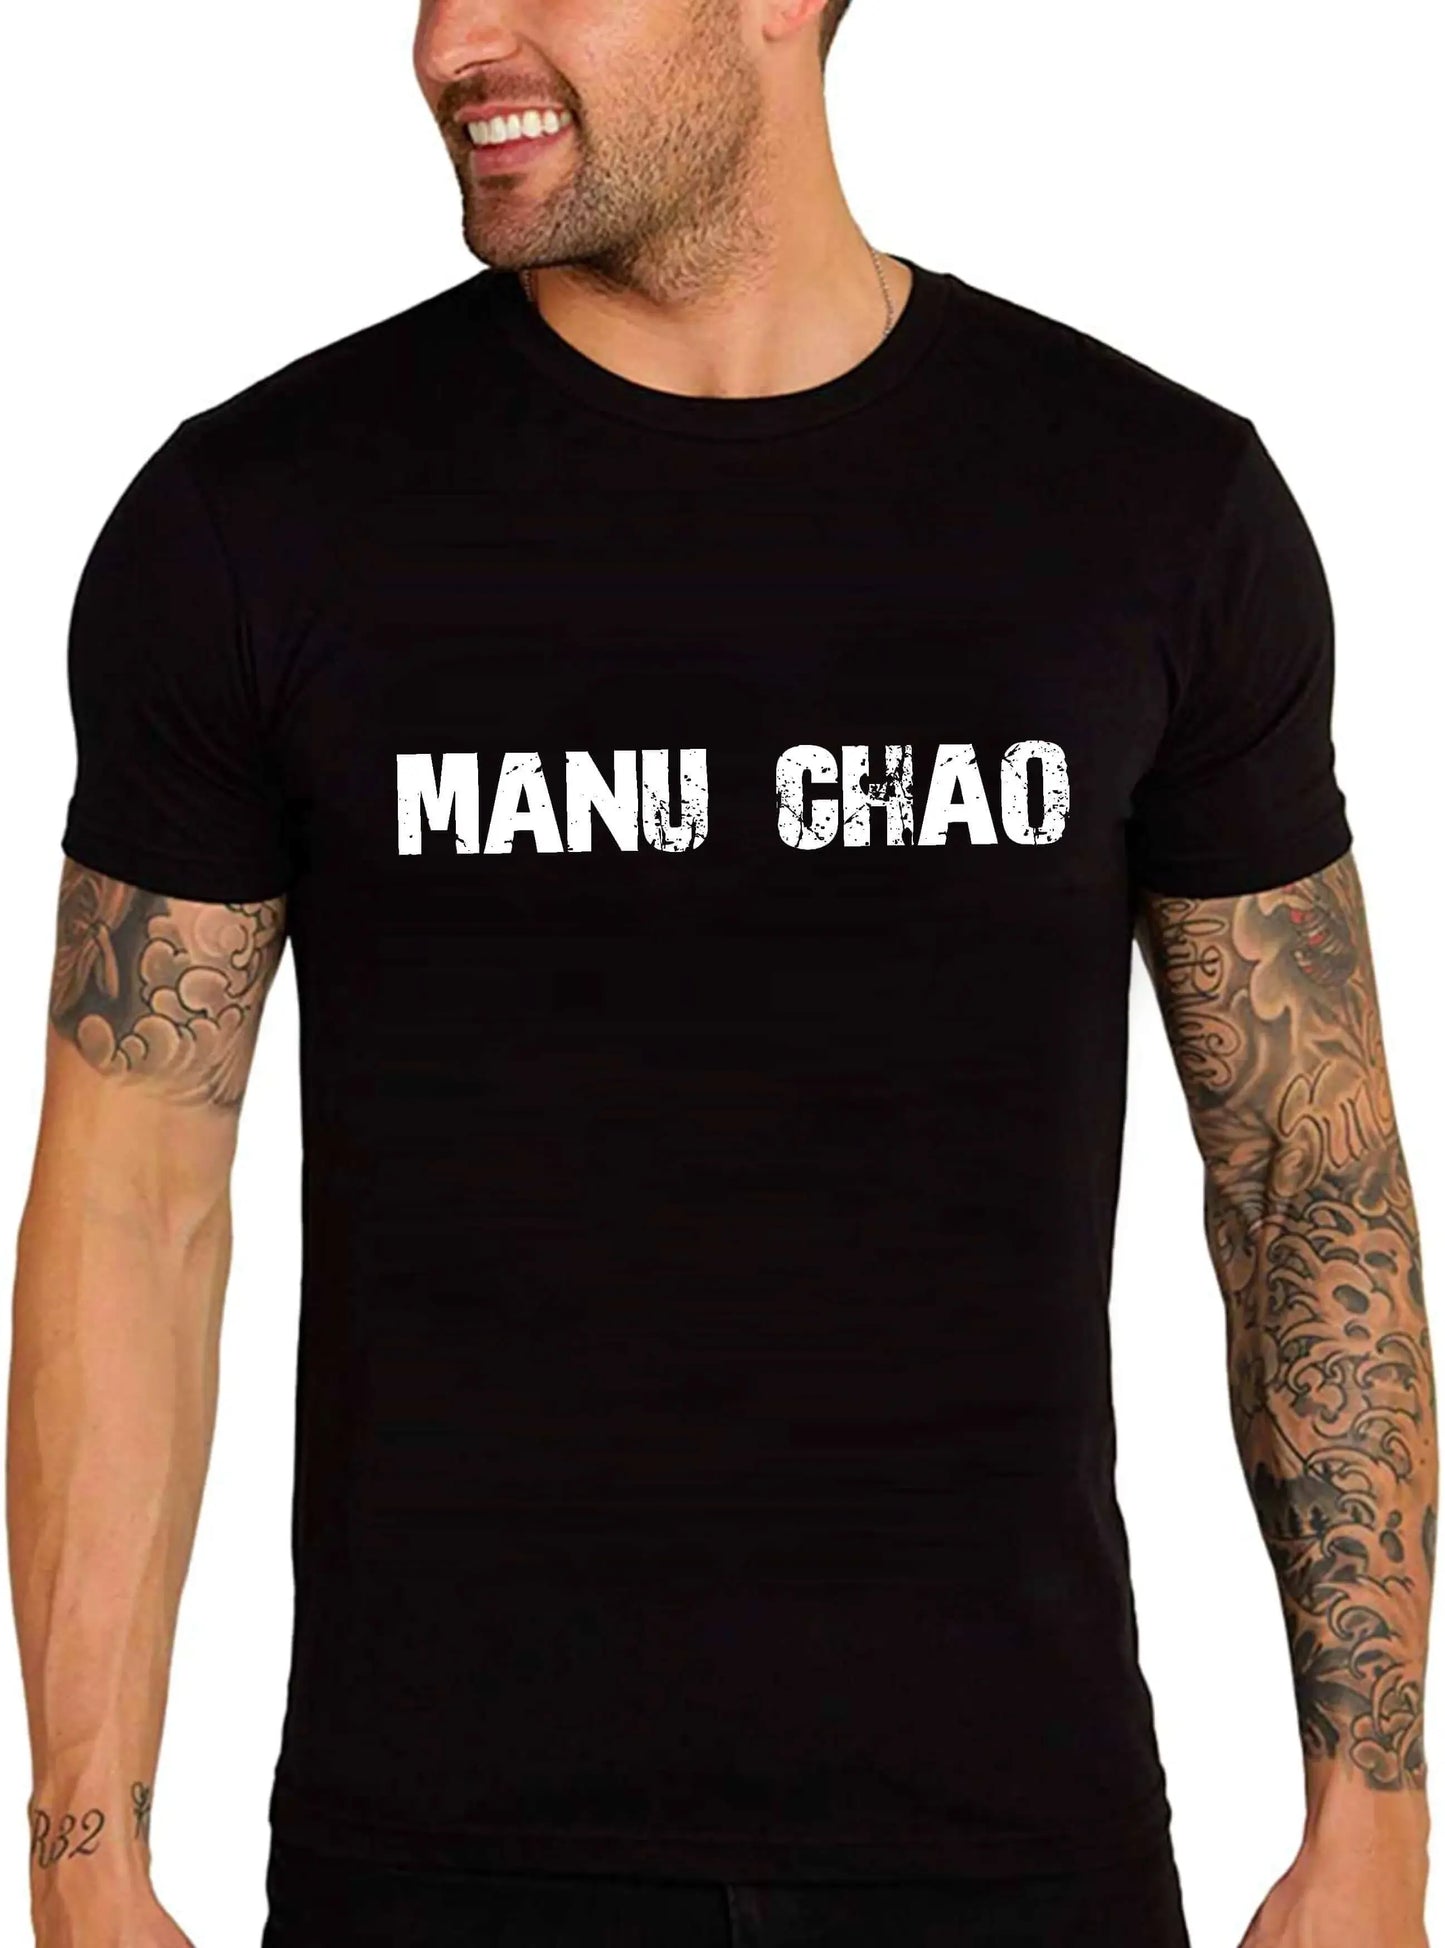 Men's Graphic T-Shirt Manu Chao Eco-Friendly Limited Edition Short Sleeve Tee-Shirt Vintage Birthday Gift Novelty